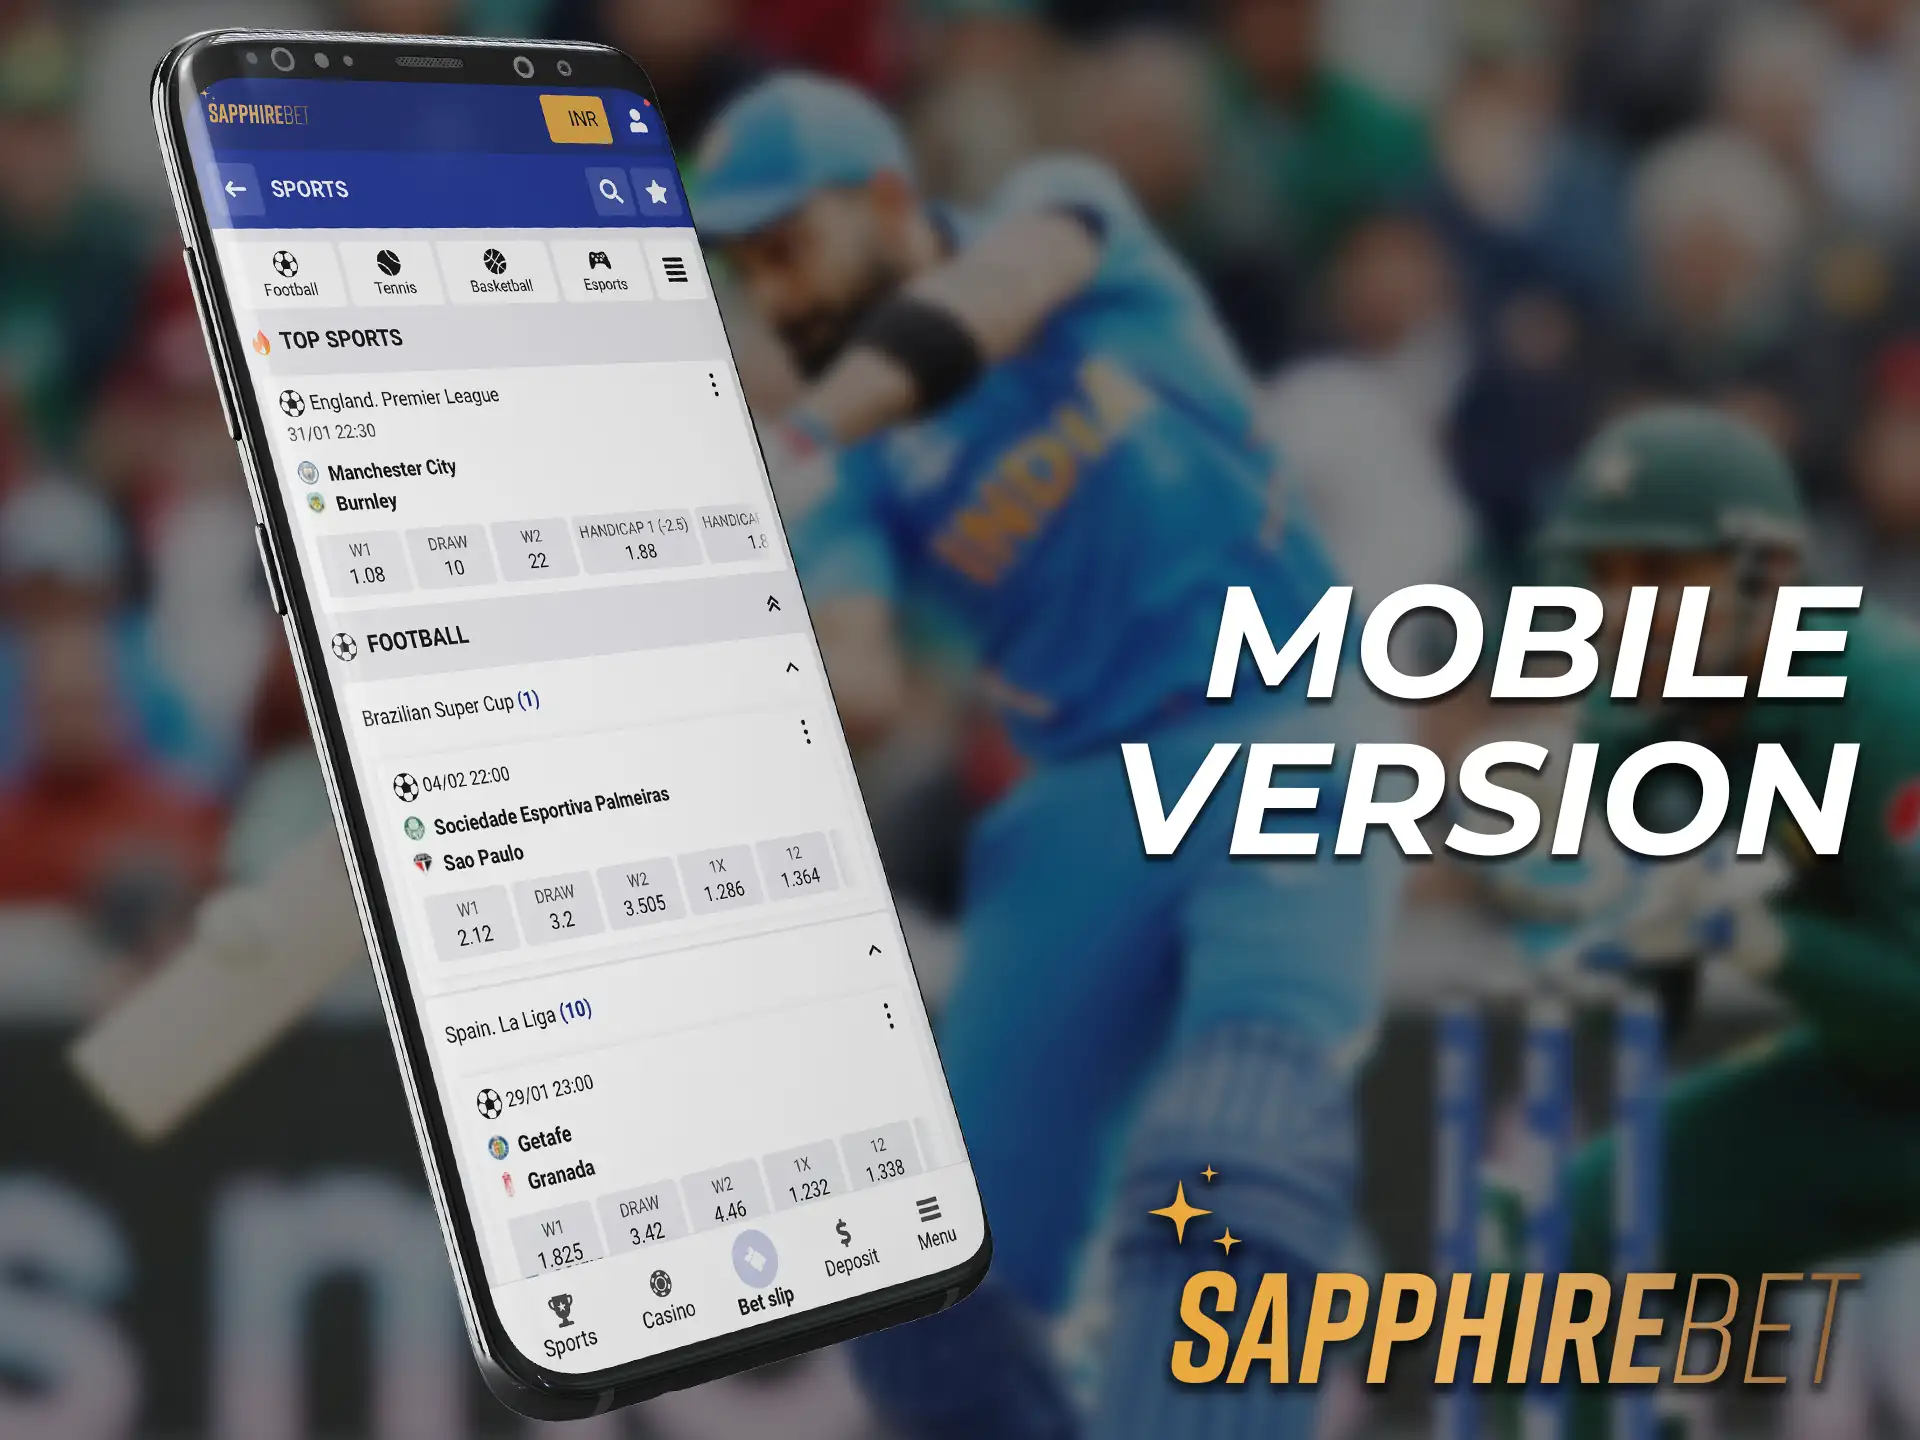 The mobile version of SapphireBet is available for Android and iOS users.